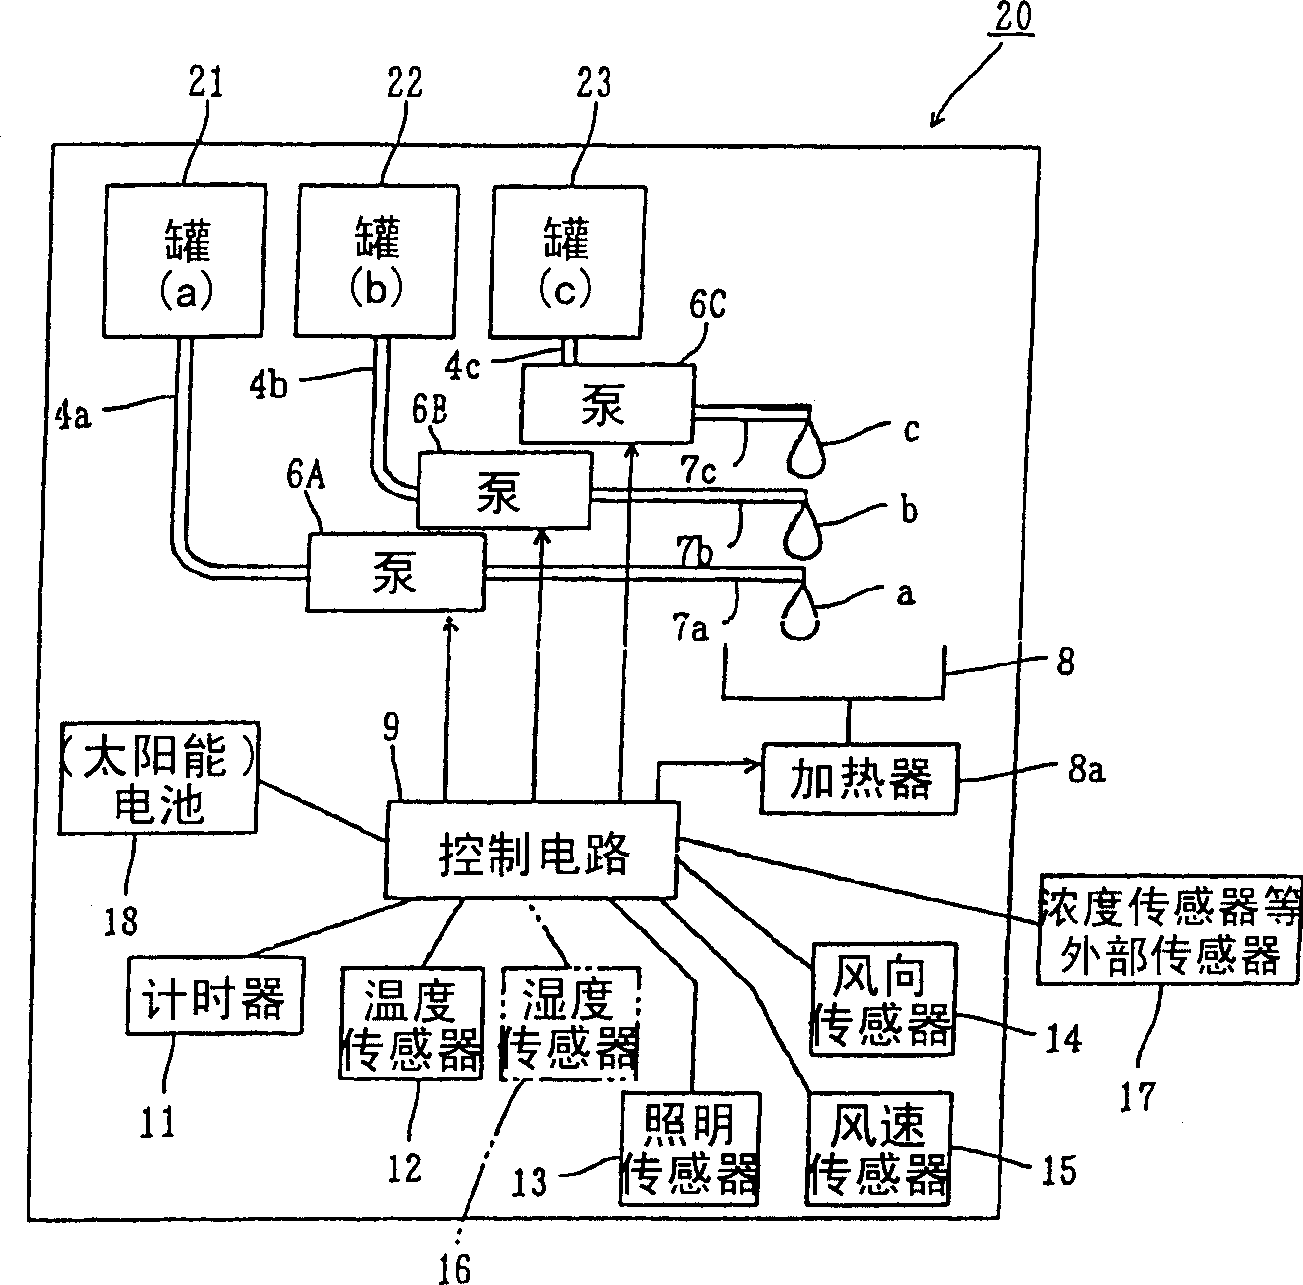 Chemical diffusion system, chemical diffusion apparatus, chemical diffusion unit and chemical cartilage